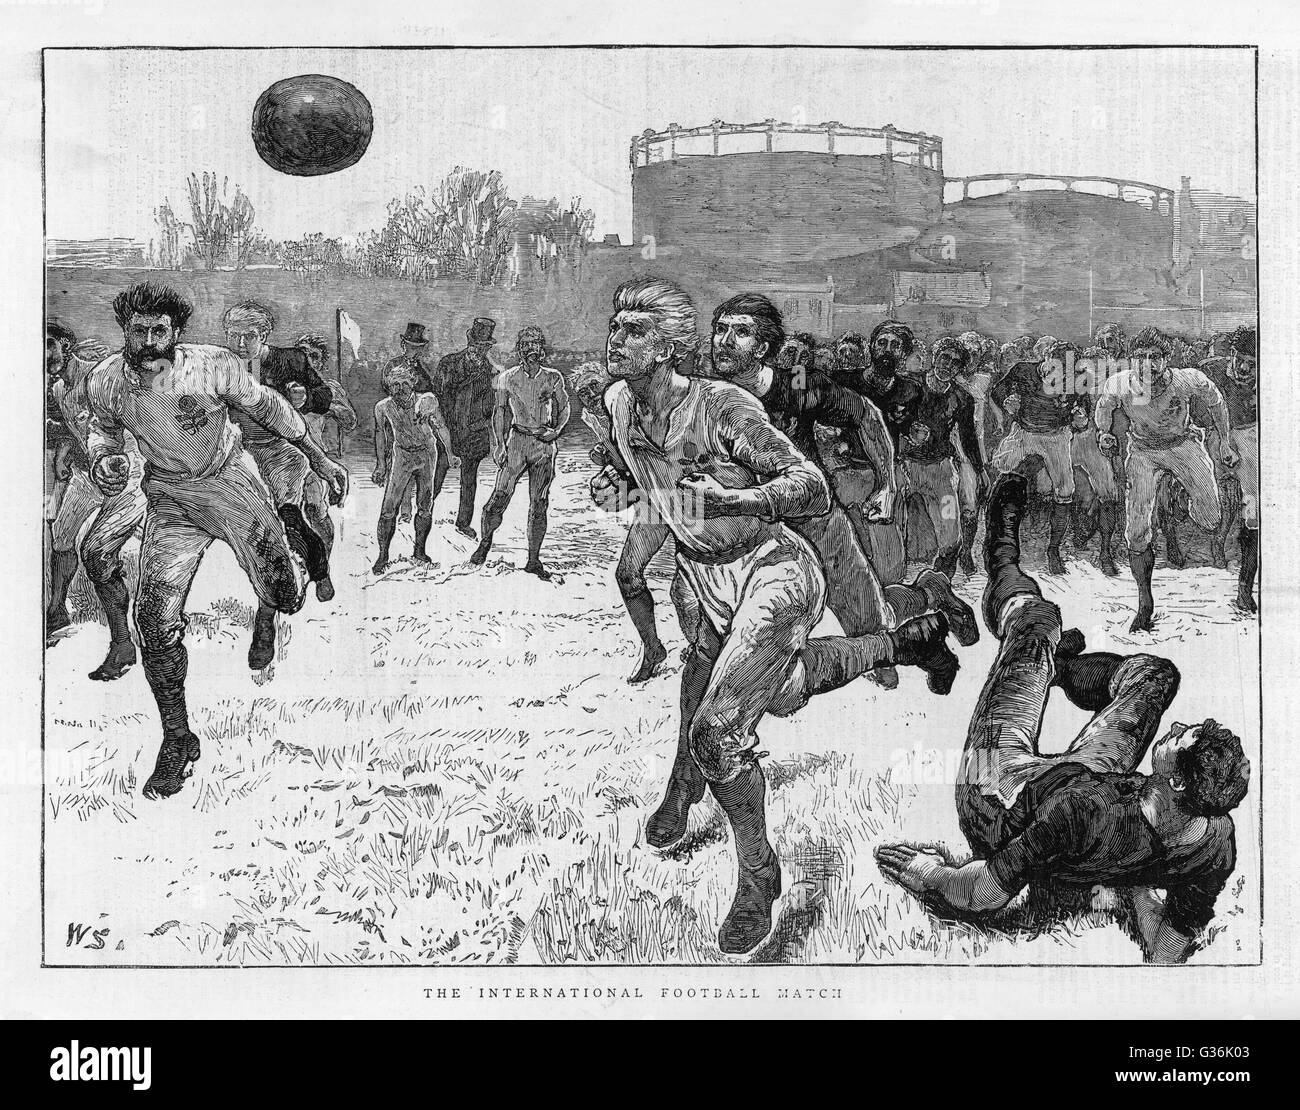 England defeat Scotland 1 - 0 in a football match at the Oval, London         Date: 5 February 1872 Stock Photo